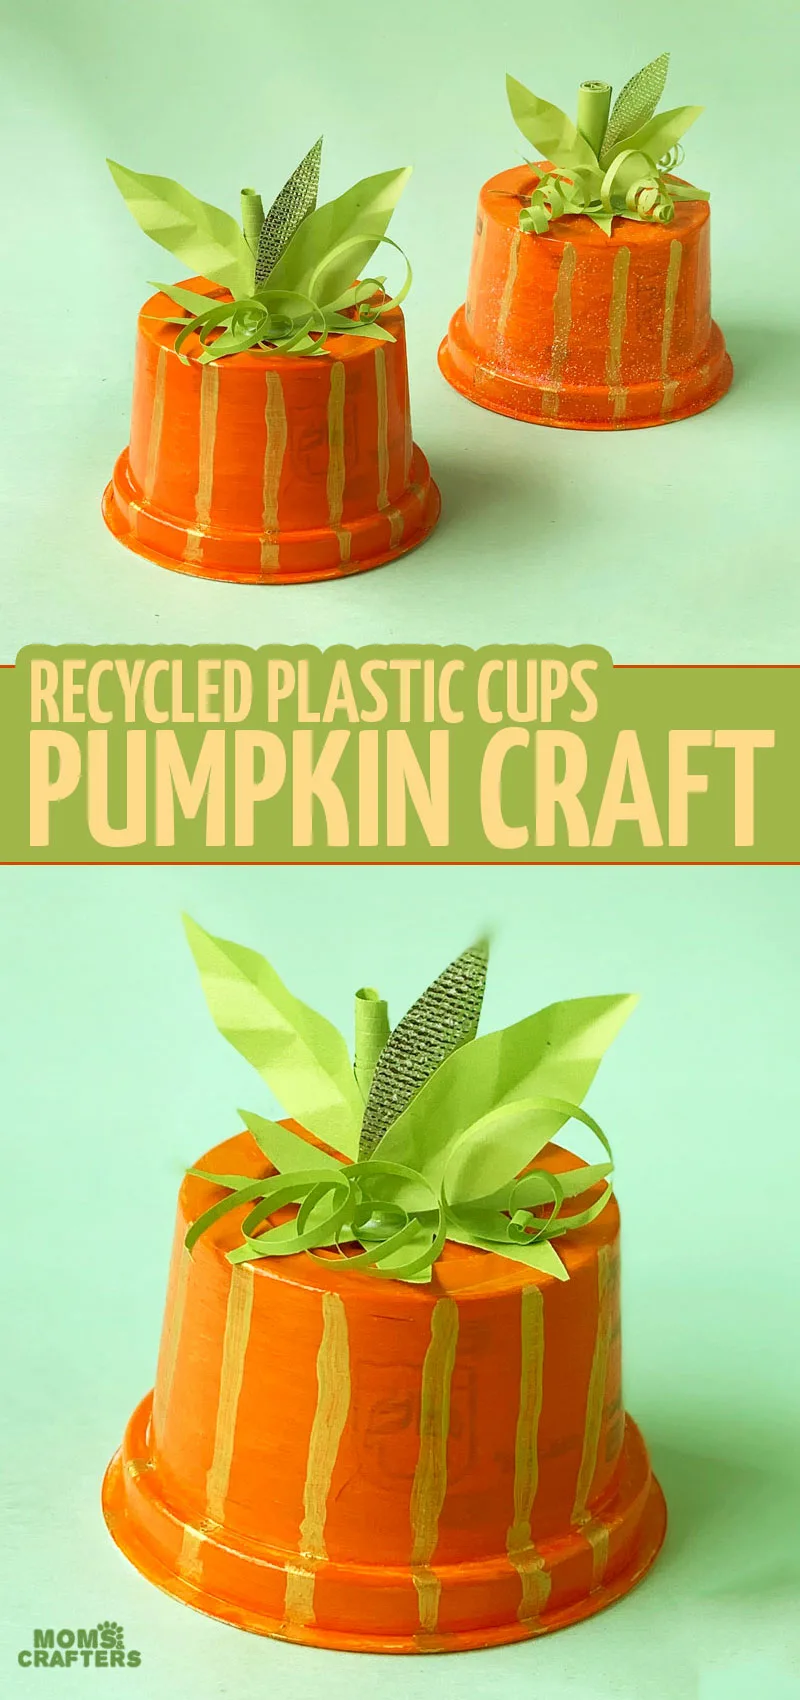 An easy peasy recycled pumpkin craft made from plastic cups - this sweet Halloween craft is also a great fall craft for preschoolers, toddlers, big kids and tweens - and it comes with a free printable template to make it even easier!